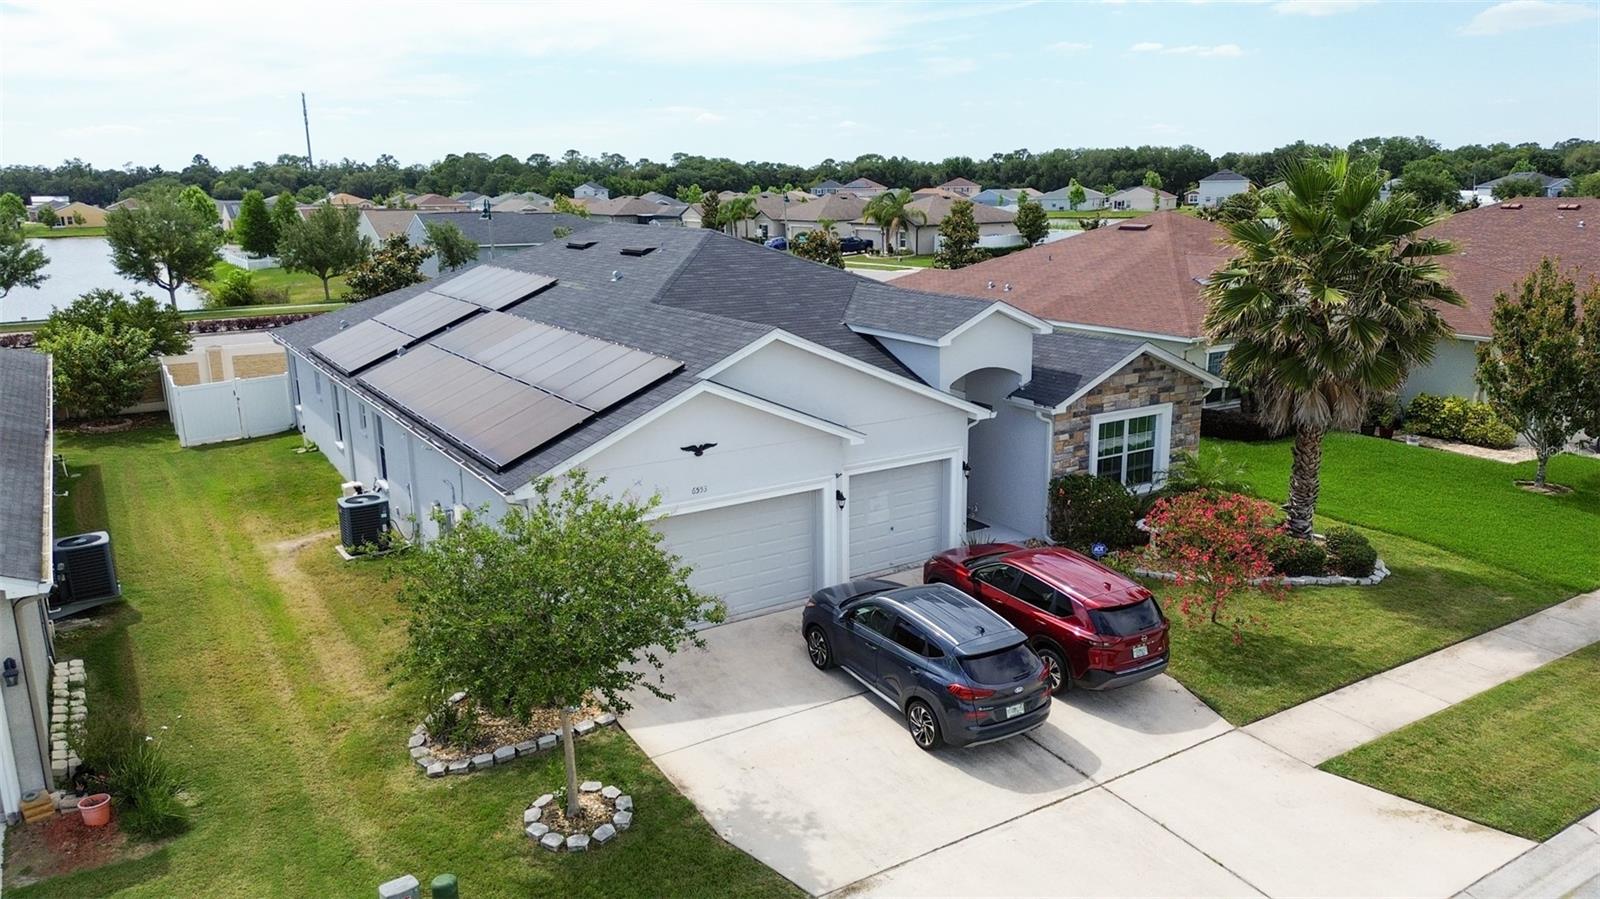 Solar panels to help off set your electric bill